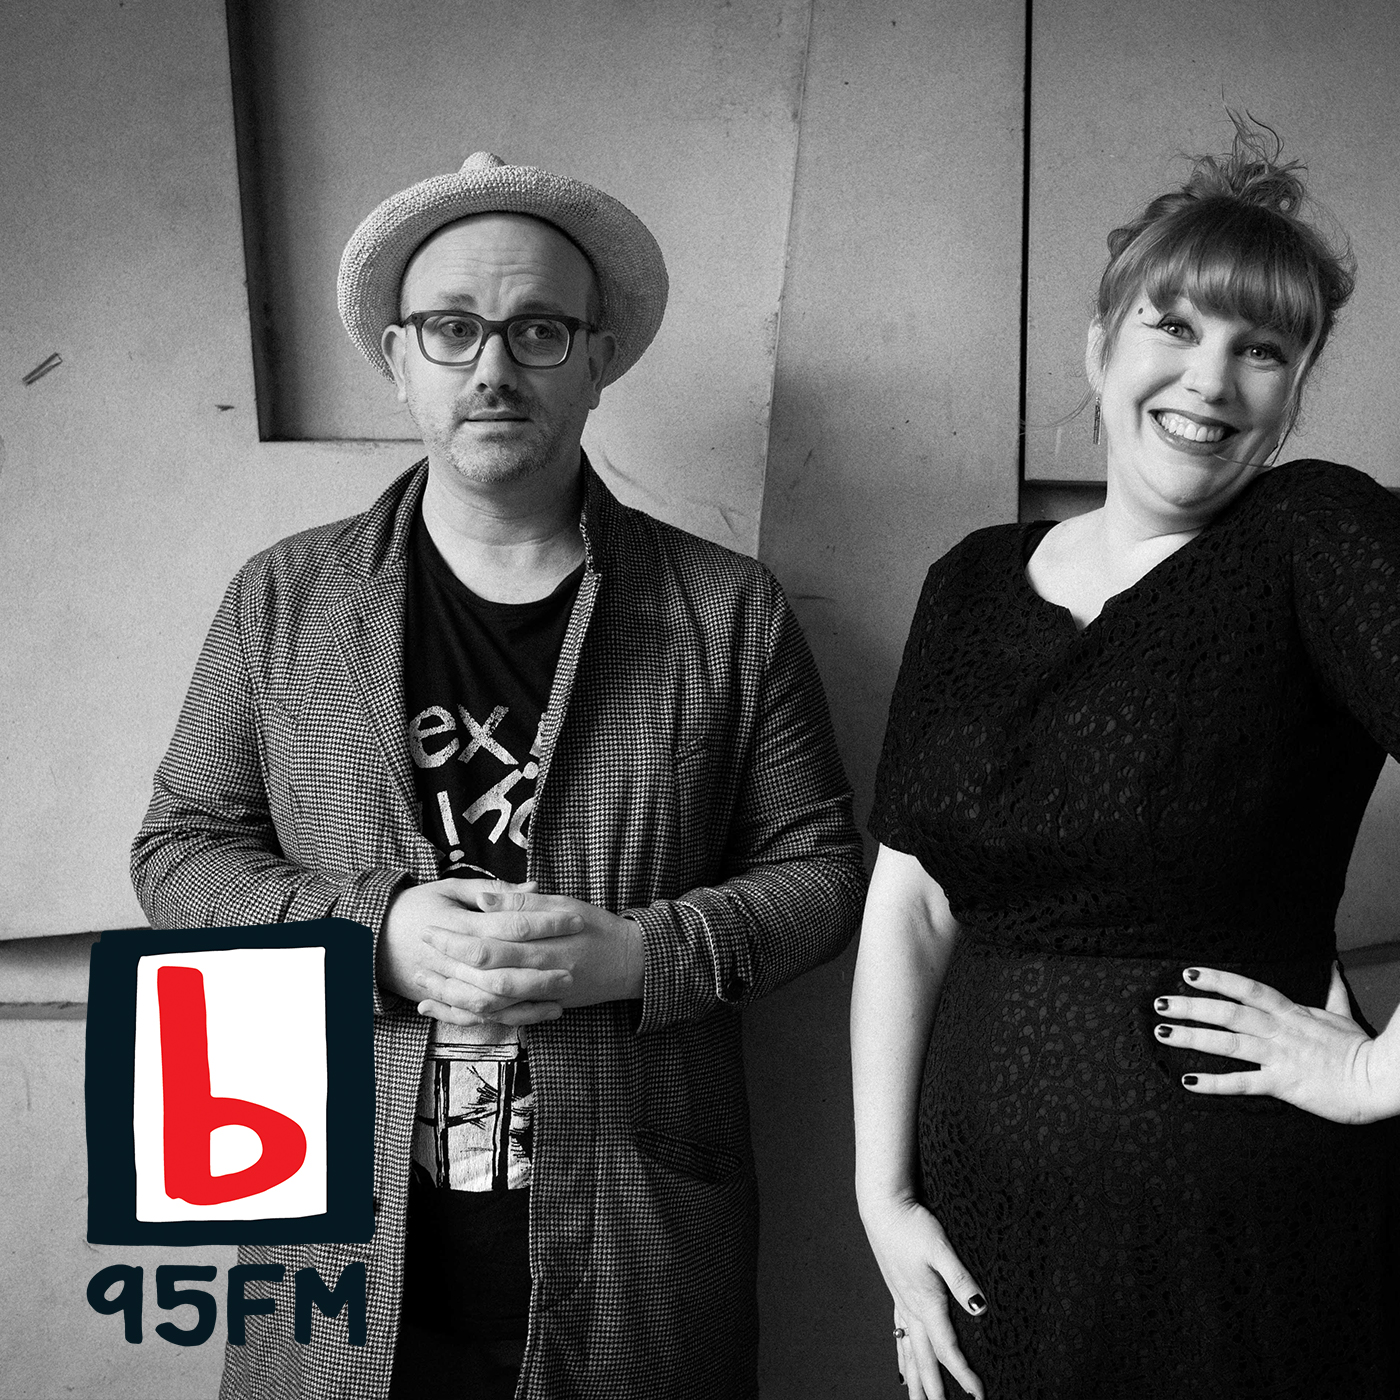 95bFM: Back on the Goodfoot